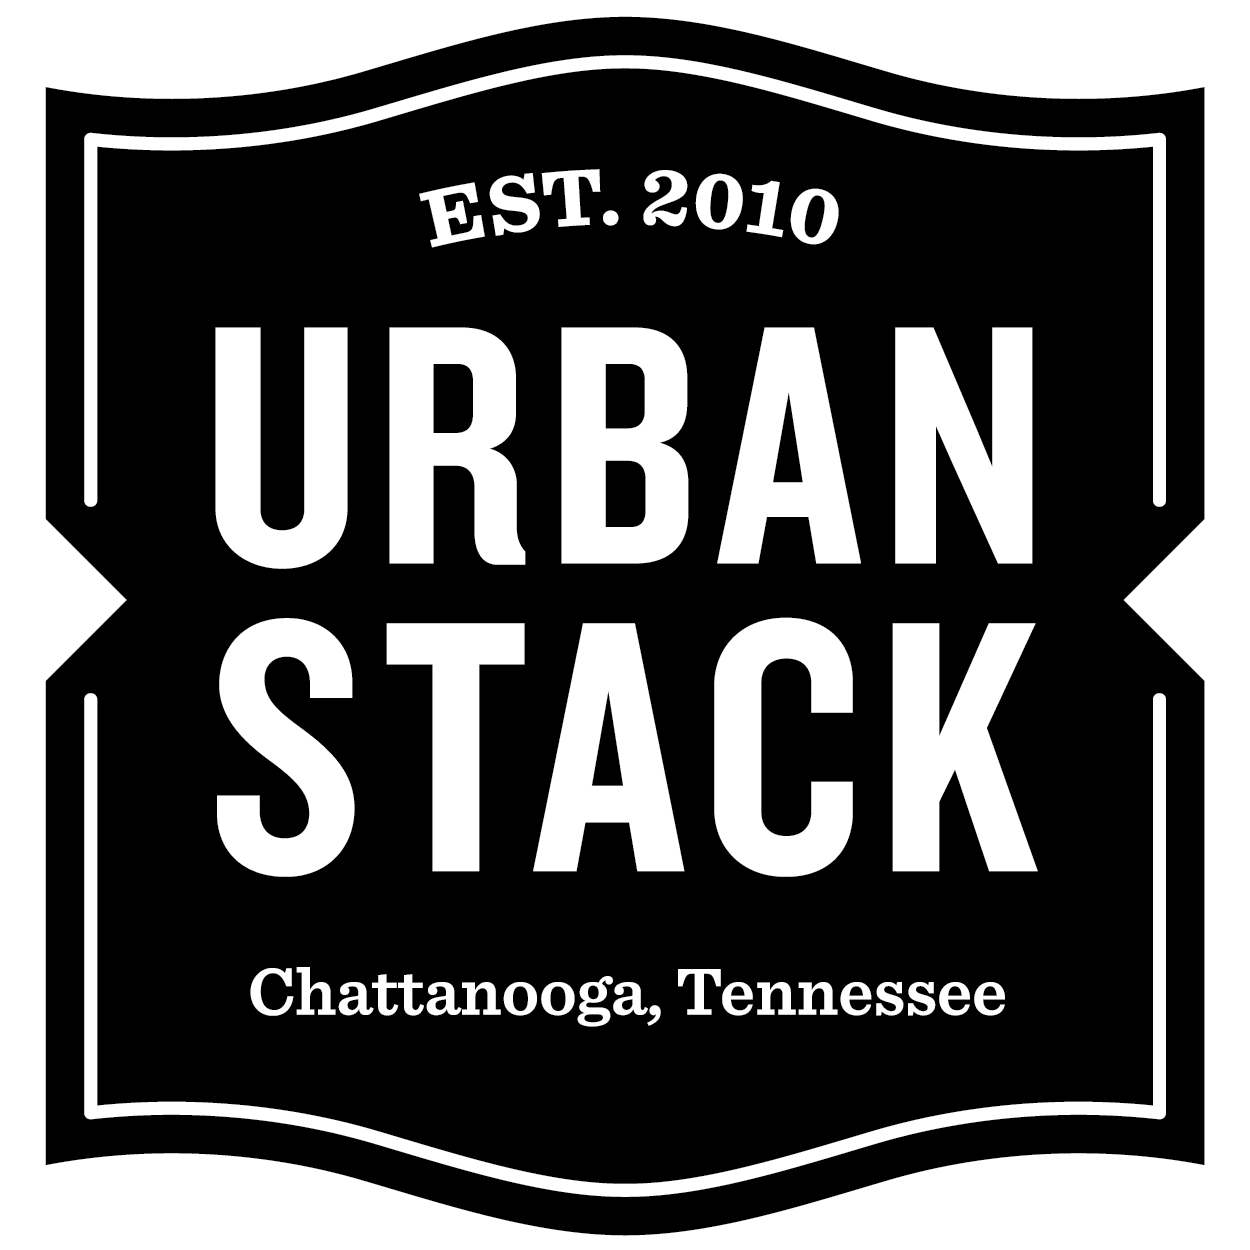 Burger and Beer Joint Logo - Urban Classics- burger joint/ beer | The Nashville Journey | Logos ...